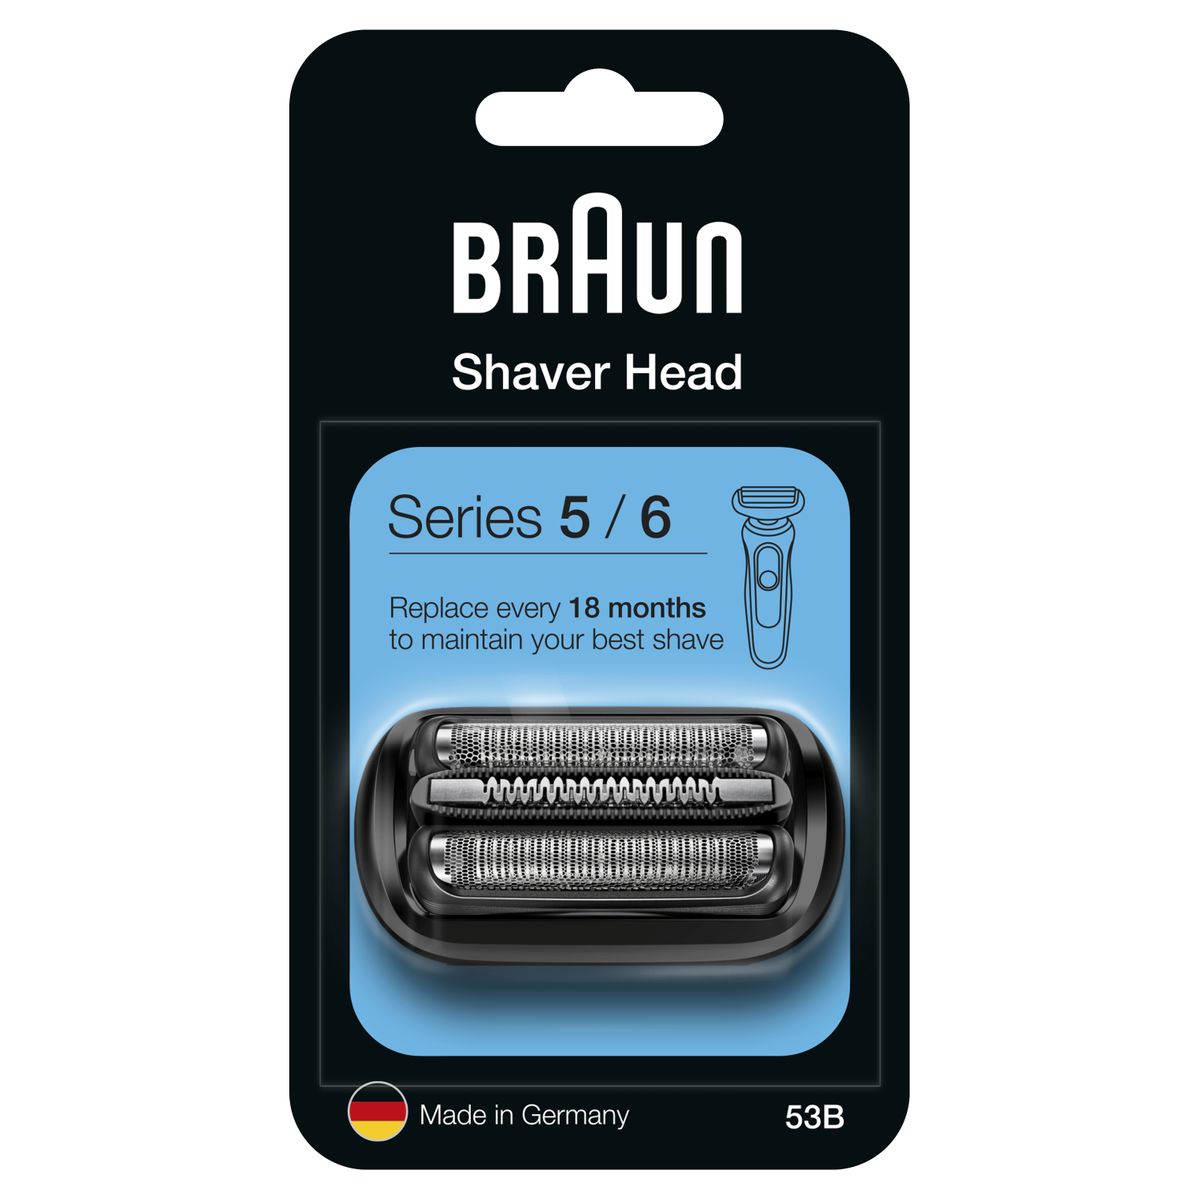 Braun Series 5 53B Electric Shaver Replacement Shaver Part, Compatible with Series 5 and Series 6 Shaver Models from 2020, Black